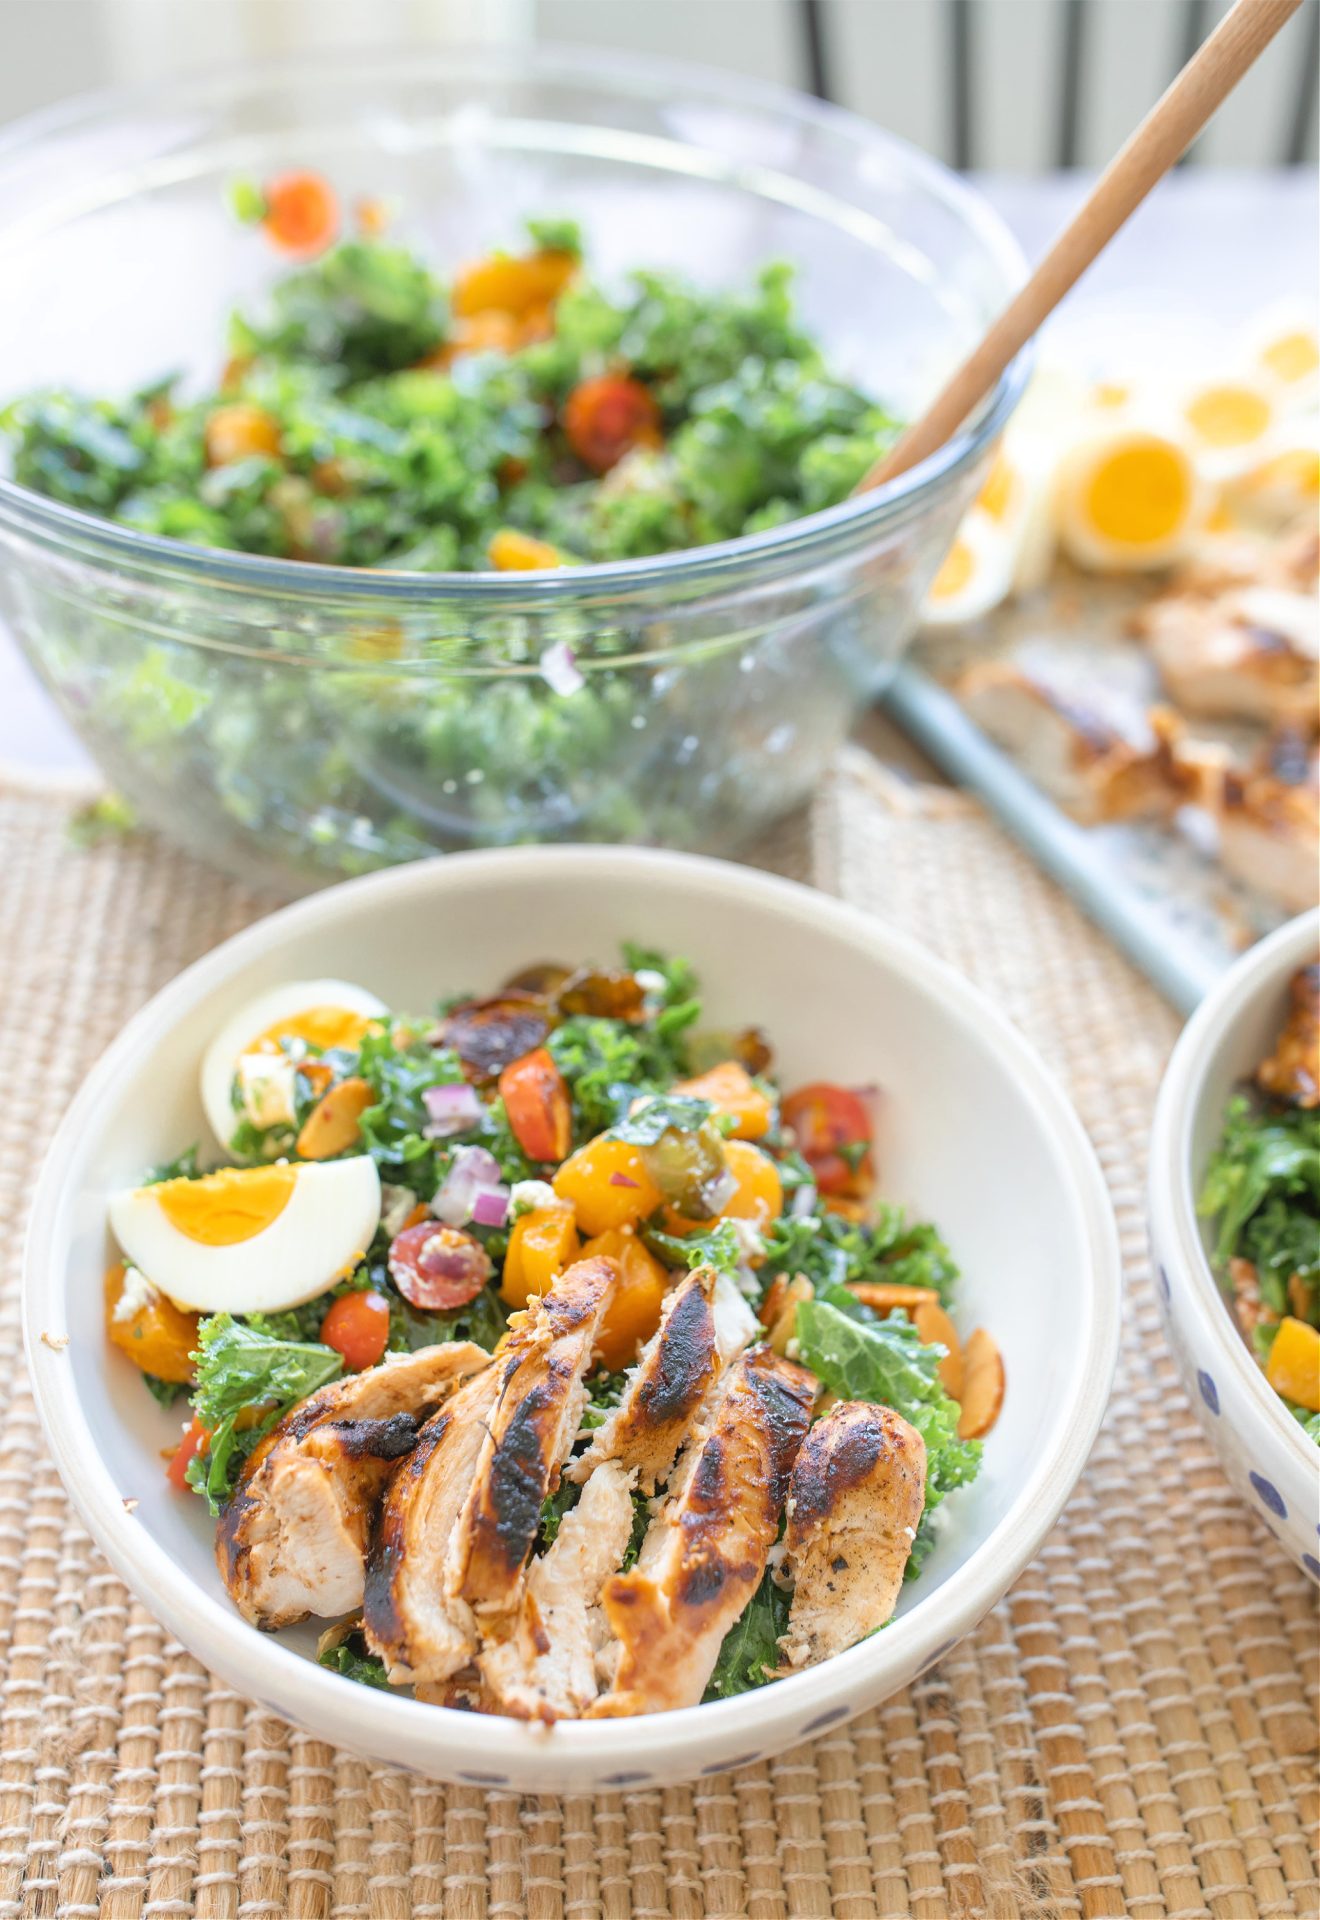 kale salad, chicken, grilled chicken, marinated kale salad, meal prep, eating healthy, food prep, goat cheese, butternut squash, Brussels sprouts, eggs, healthy eating, postpartum weightloss, postpartum weight loss, dinner, lunch, tossed salad, gluten-free, nuts, healthy dinner idea